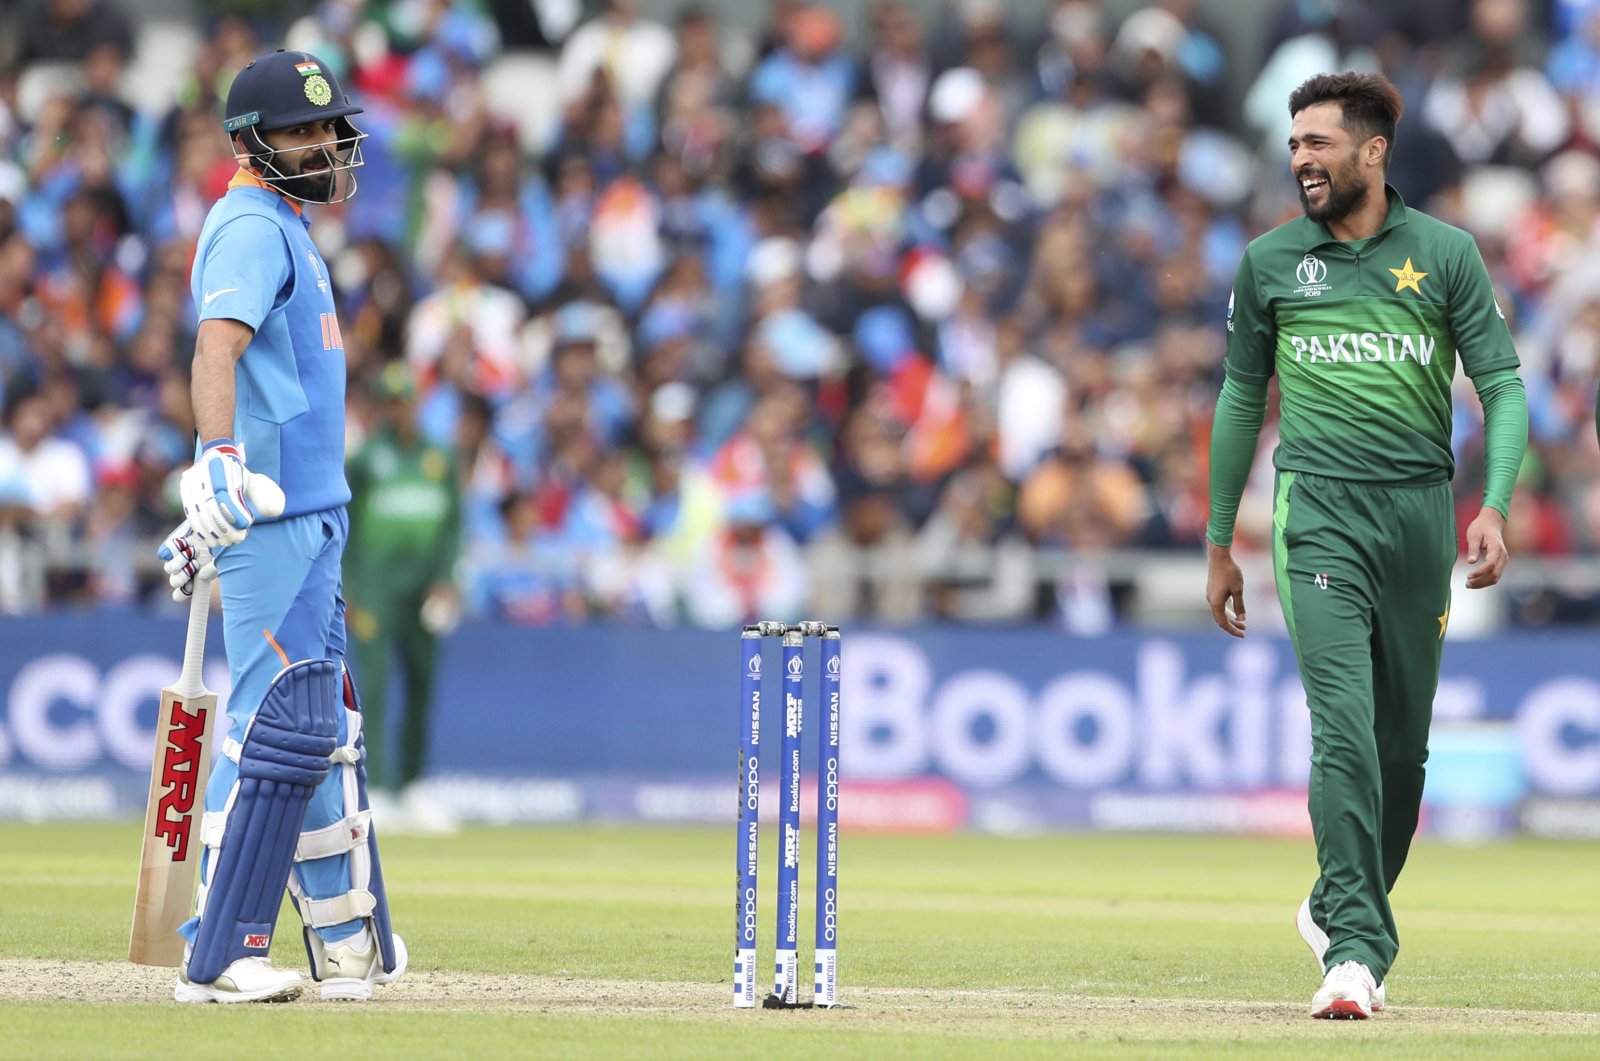 Pakistan's Mohammad Amir (R) gestures toward India's captain Virat Kohli during a Cricket World Cup match at Old Trafford in Manchester, England, June 16, 2019. (AP Photo)